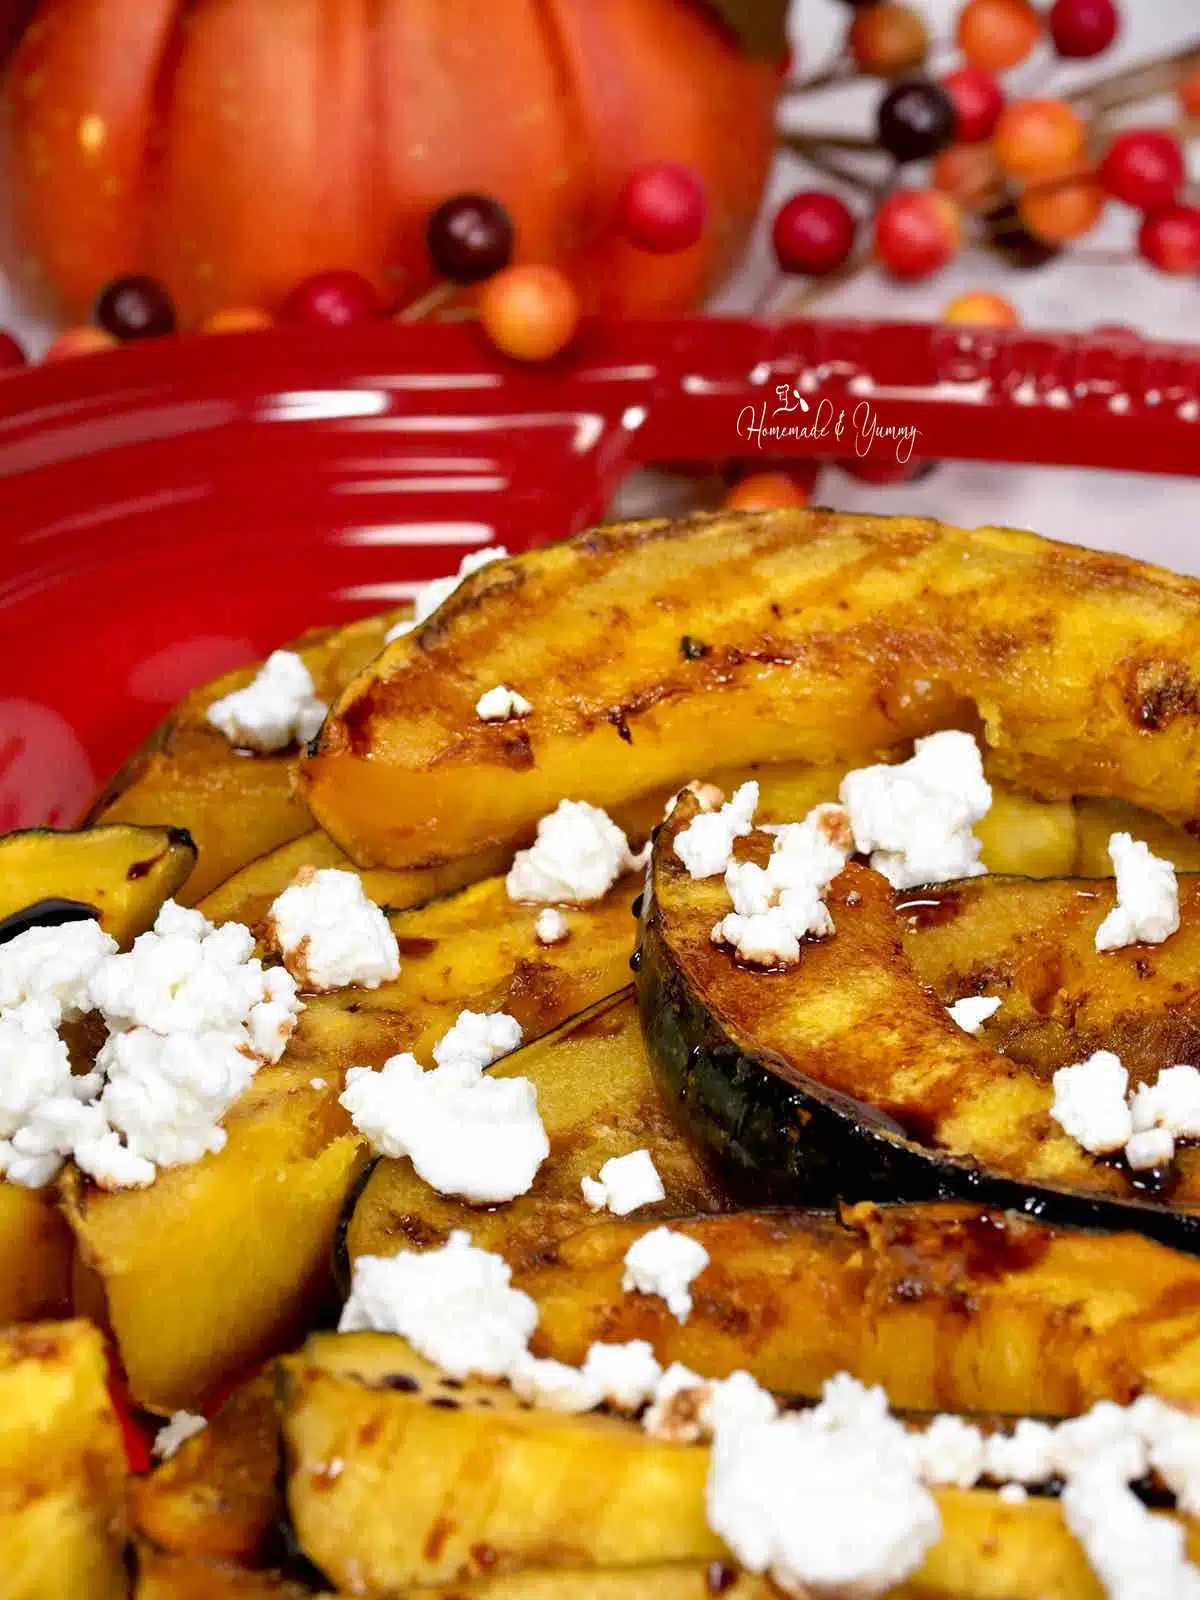 Feta cheese and balsamic topped squash slices.